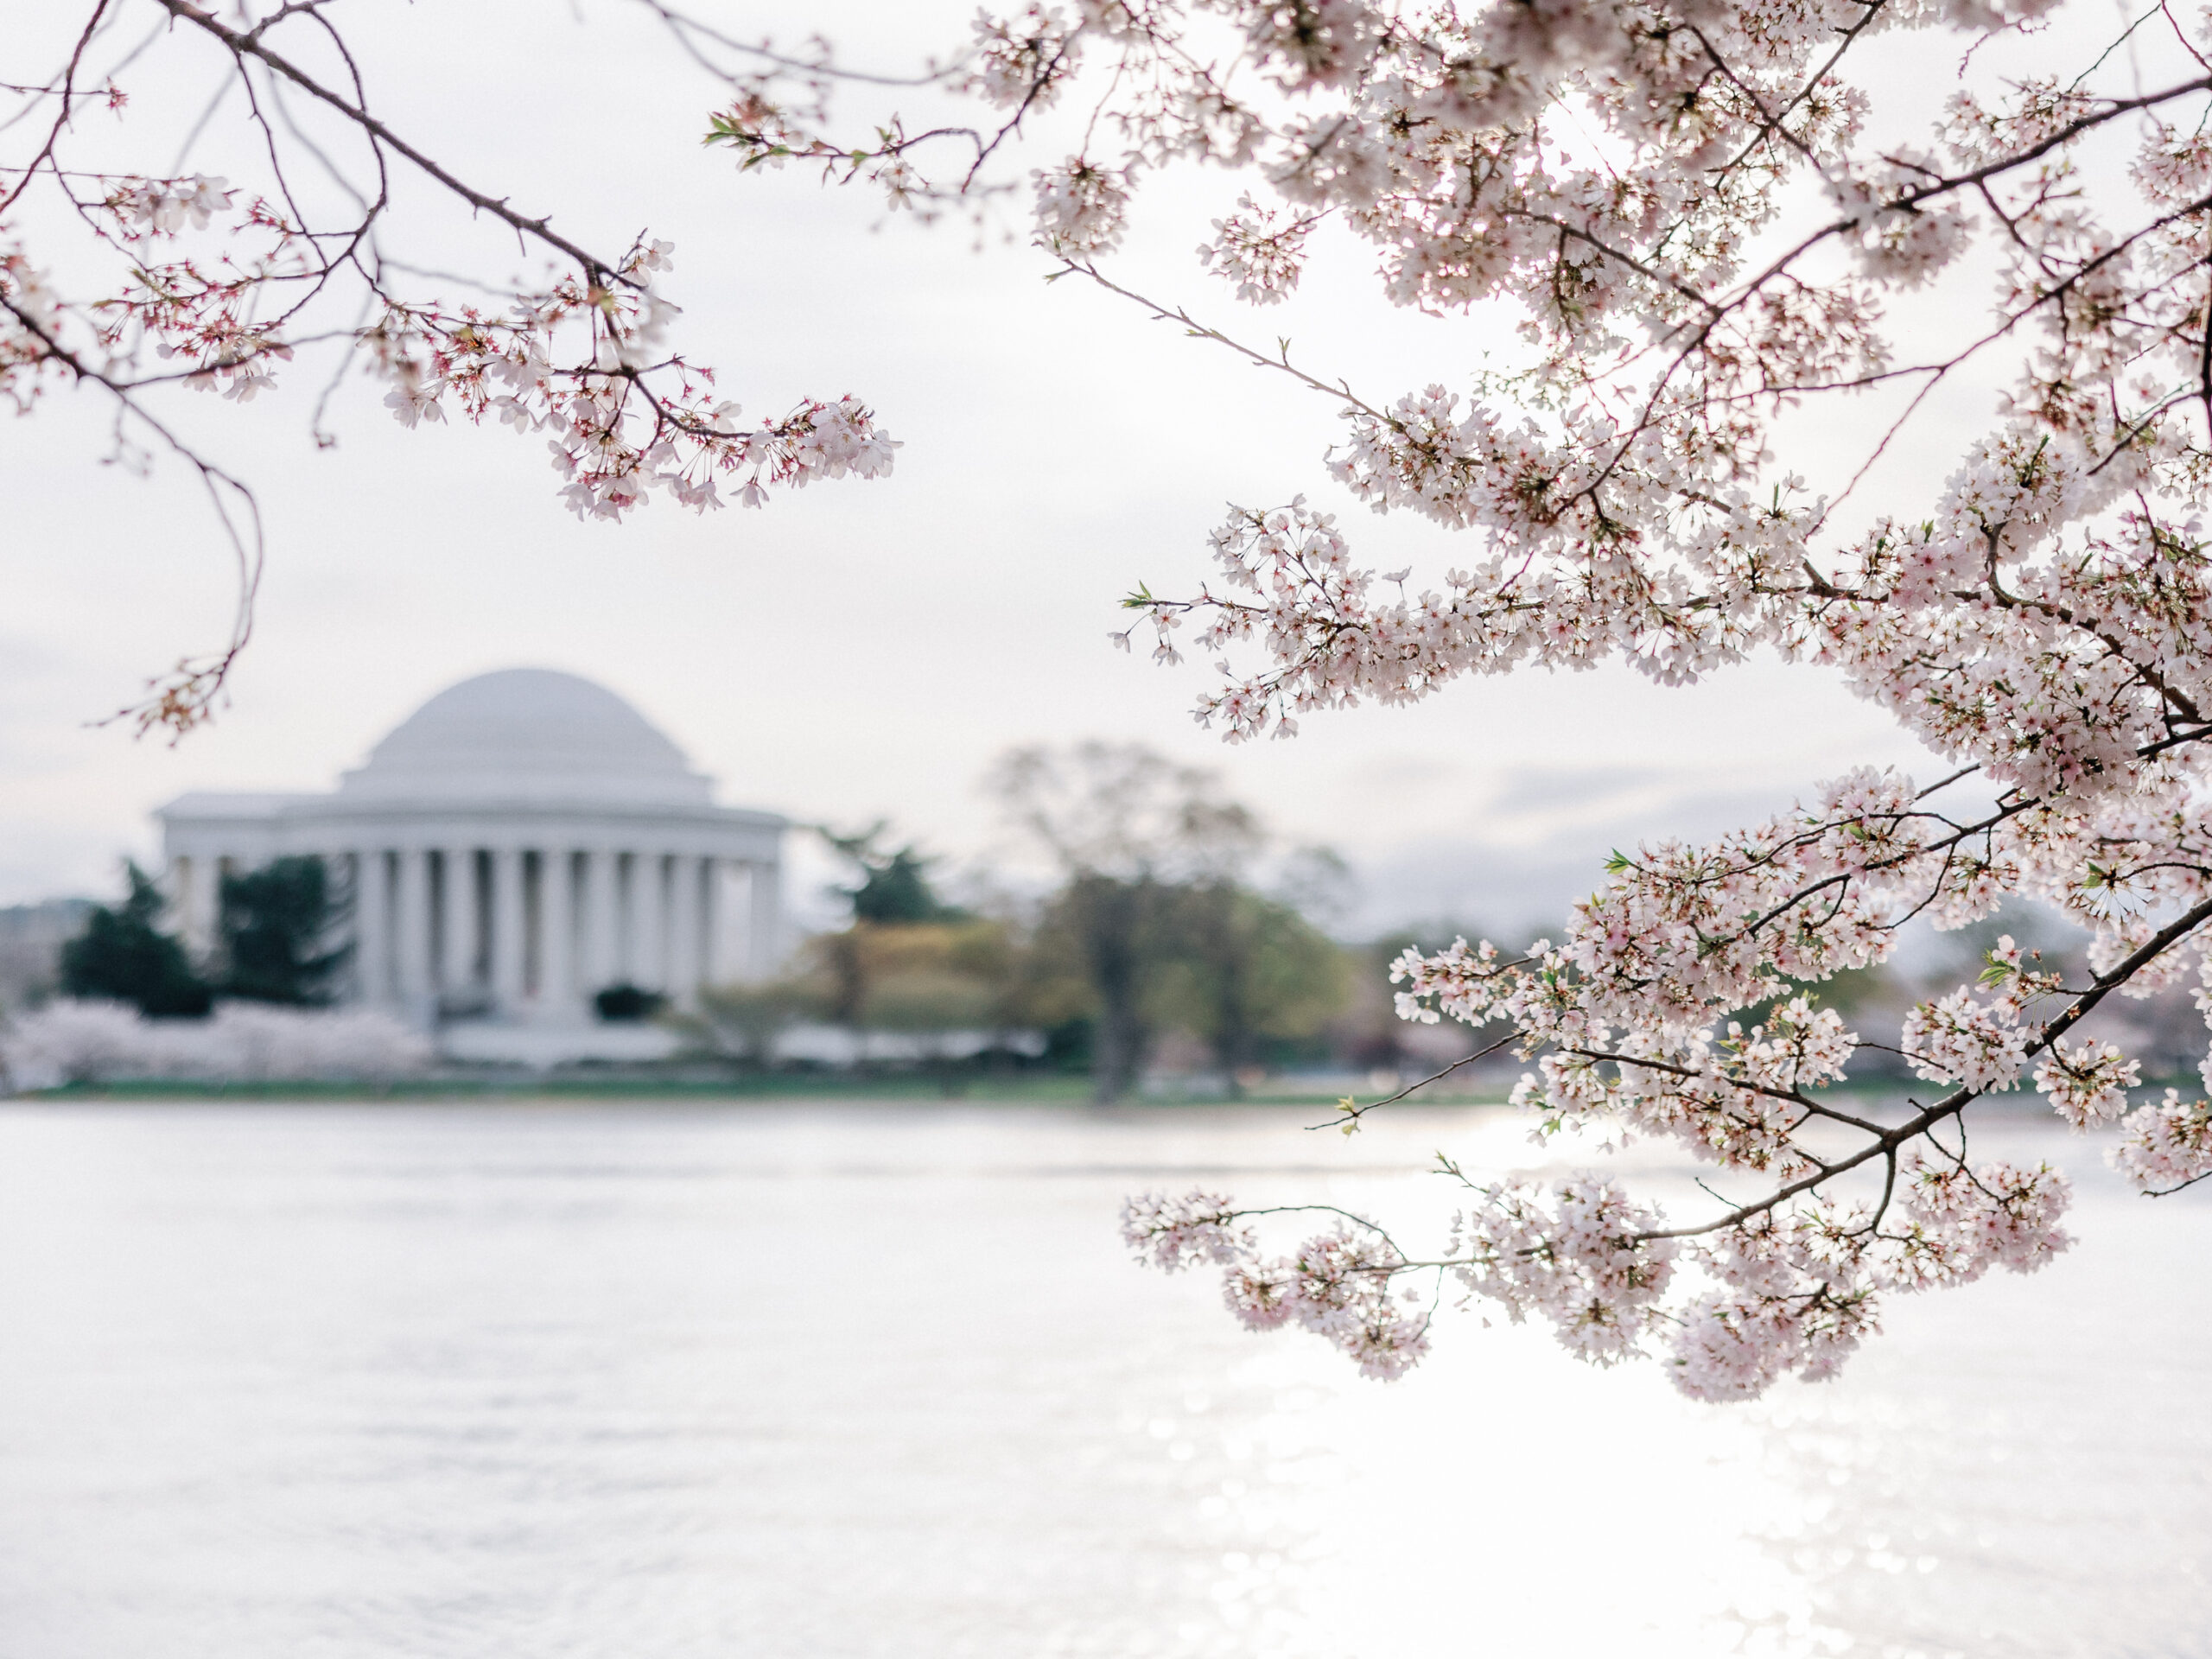 The jefferson memorial during the cherry blossom bloom in washington dc